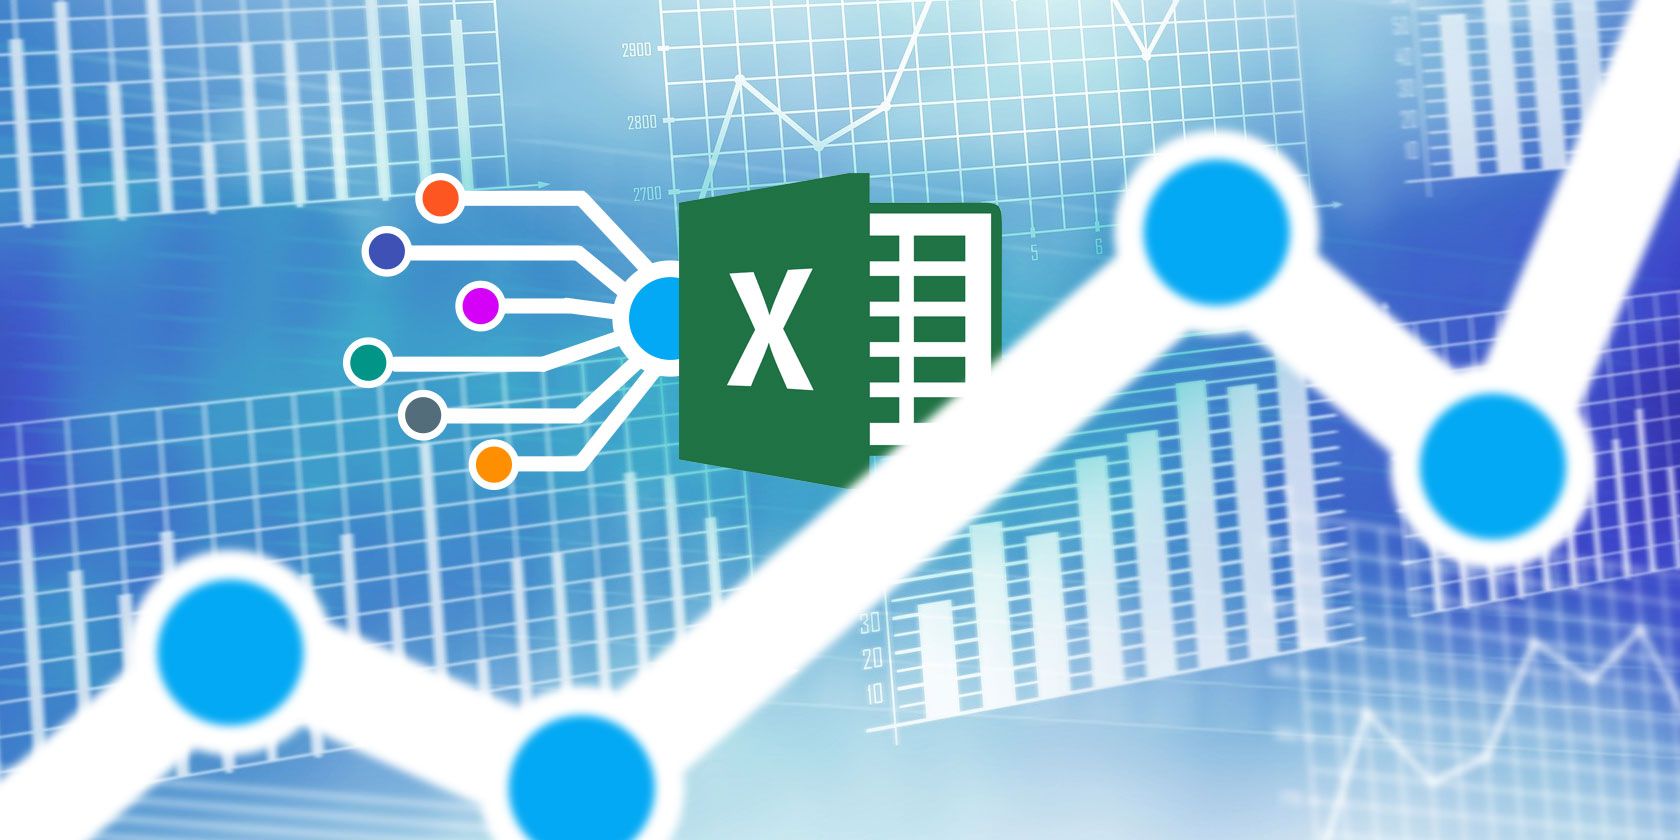 basic excel functions for data analysis